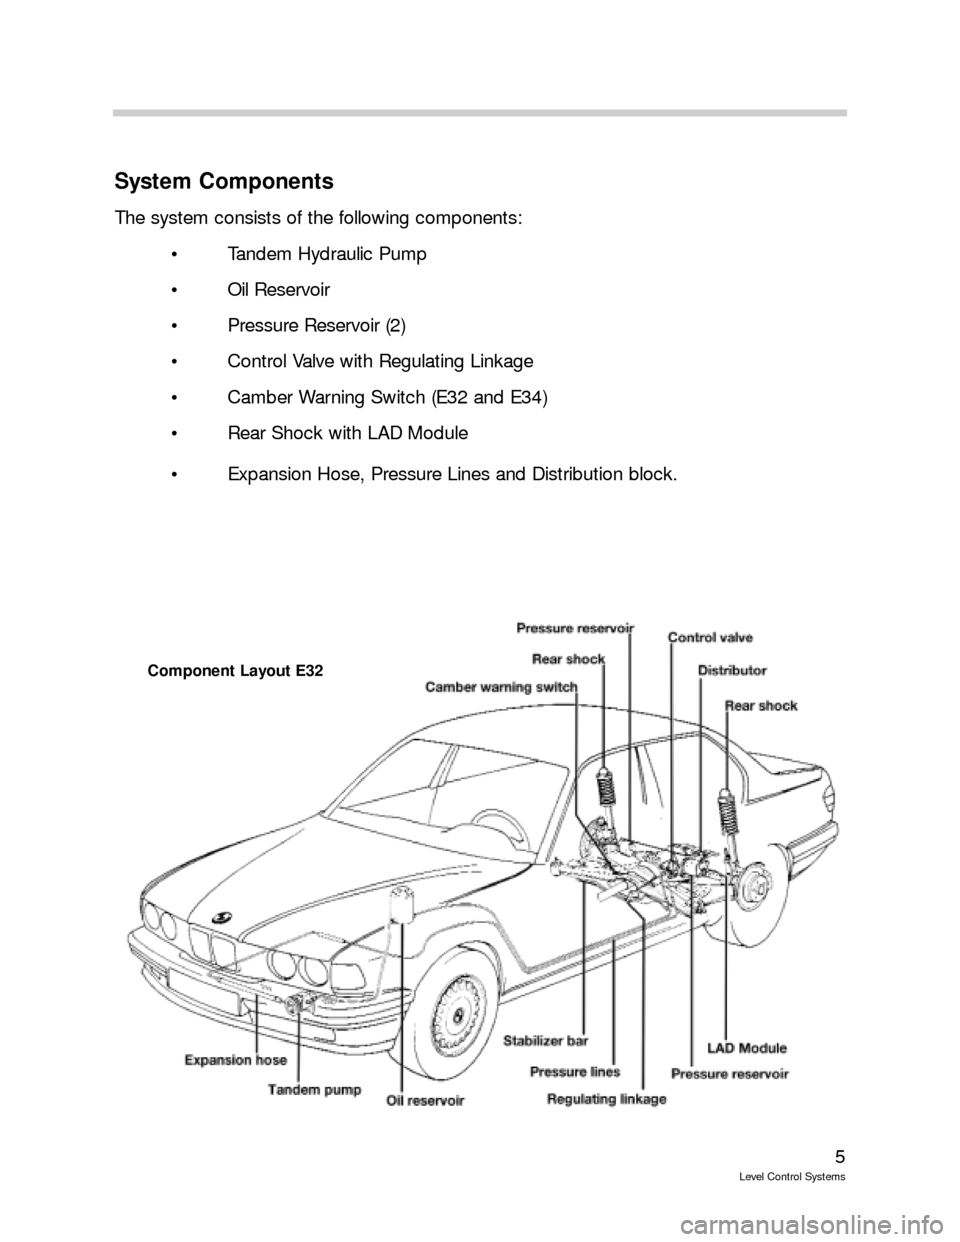 BMW 750IL 1996 E38 Level Control System Manual 5
Level Control Systems
System Components
The system consists of the following components:
 Tandem Hydraulic Pump
 Oil Reservoir
 Pressure Reservoir (2)
 Control Valve with Regulating Linkage
 Ca